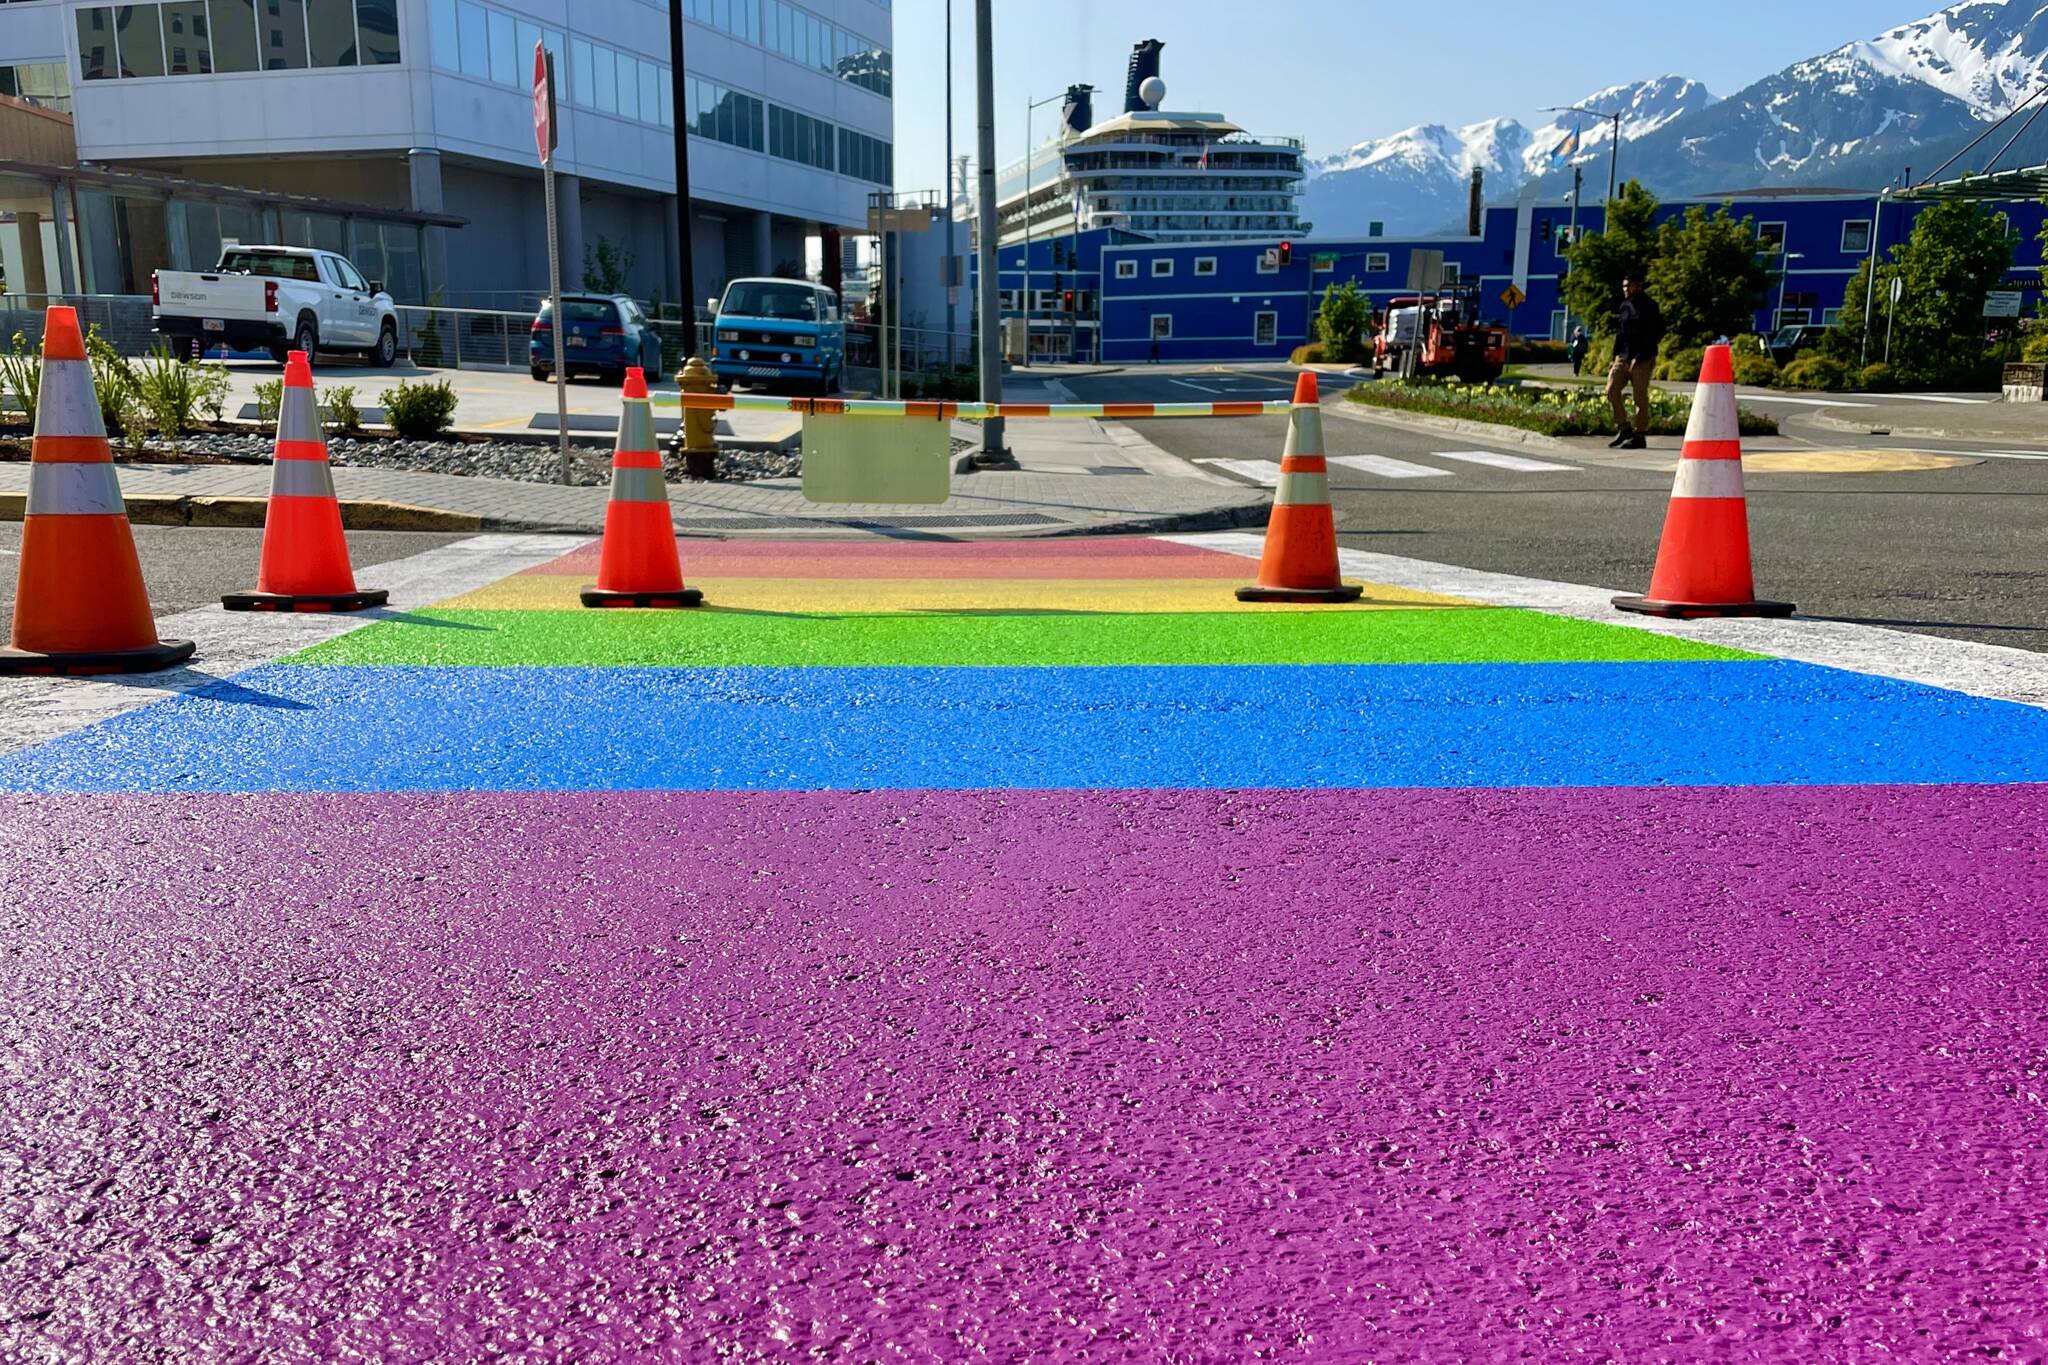 Paint dries Thursday morning on Juneau’s rainbow crosswalk as the colorful crossing gets its annual repainting on June 16, 2022. (Michael S. Lockett / Juneau Empire)